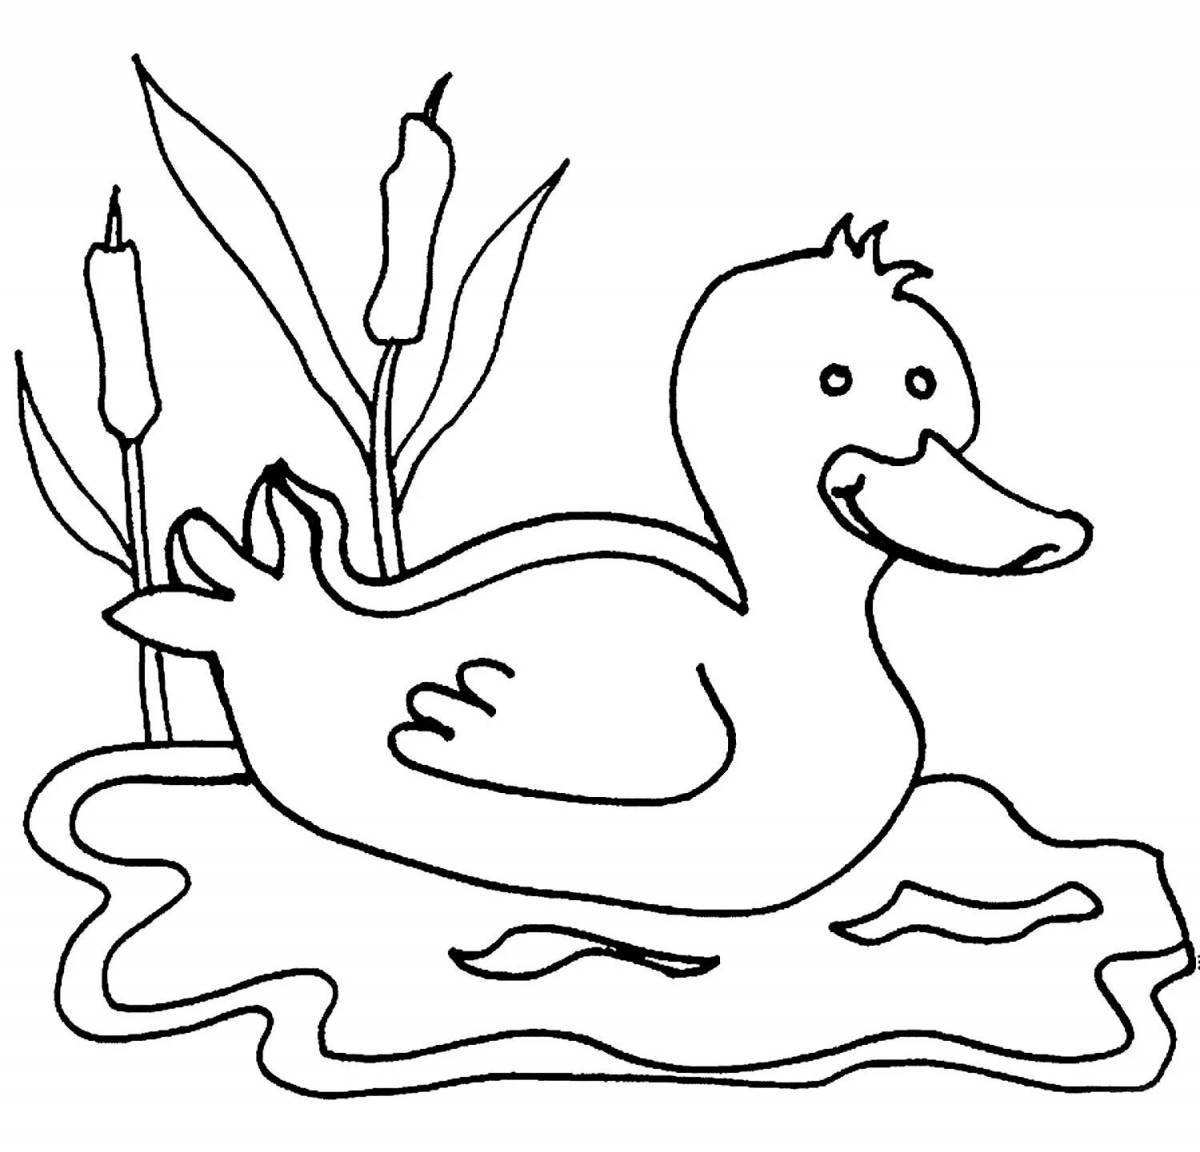 Gorgeous duck coloring book for kids